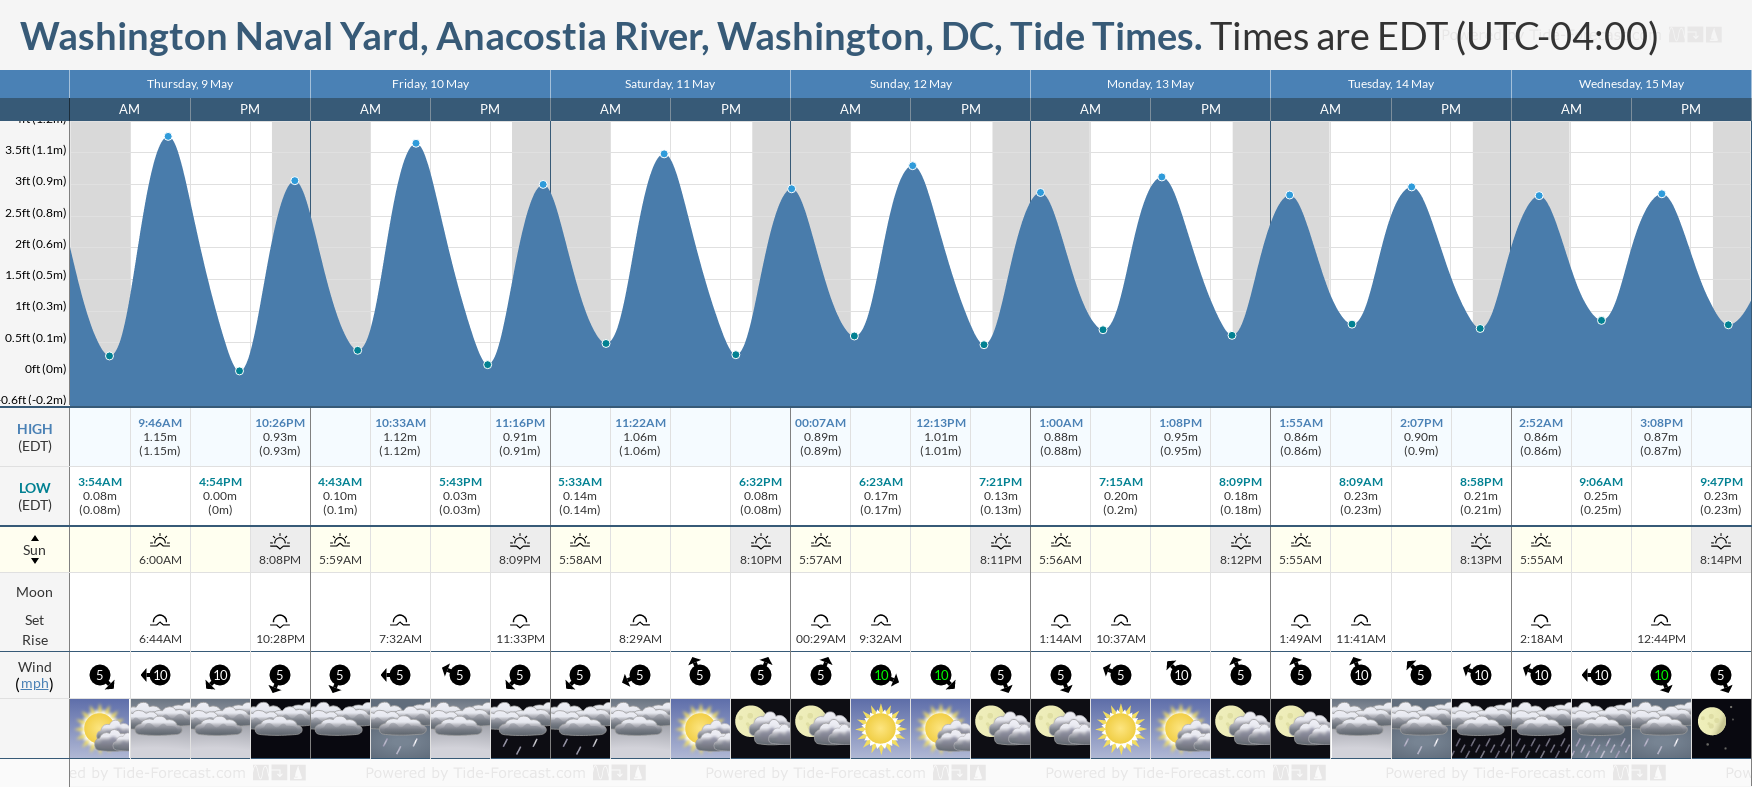 Washington Naval Yard, Anacostia River, Washington, DC Tide Chart including high and low tide tide times for the next 7 days